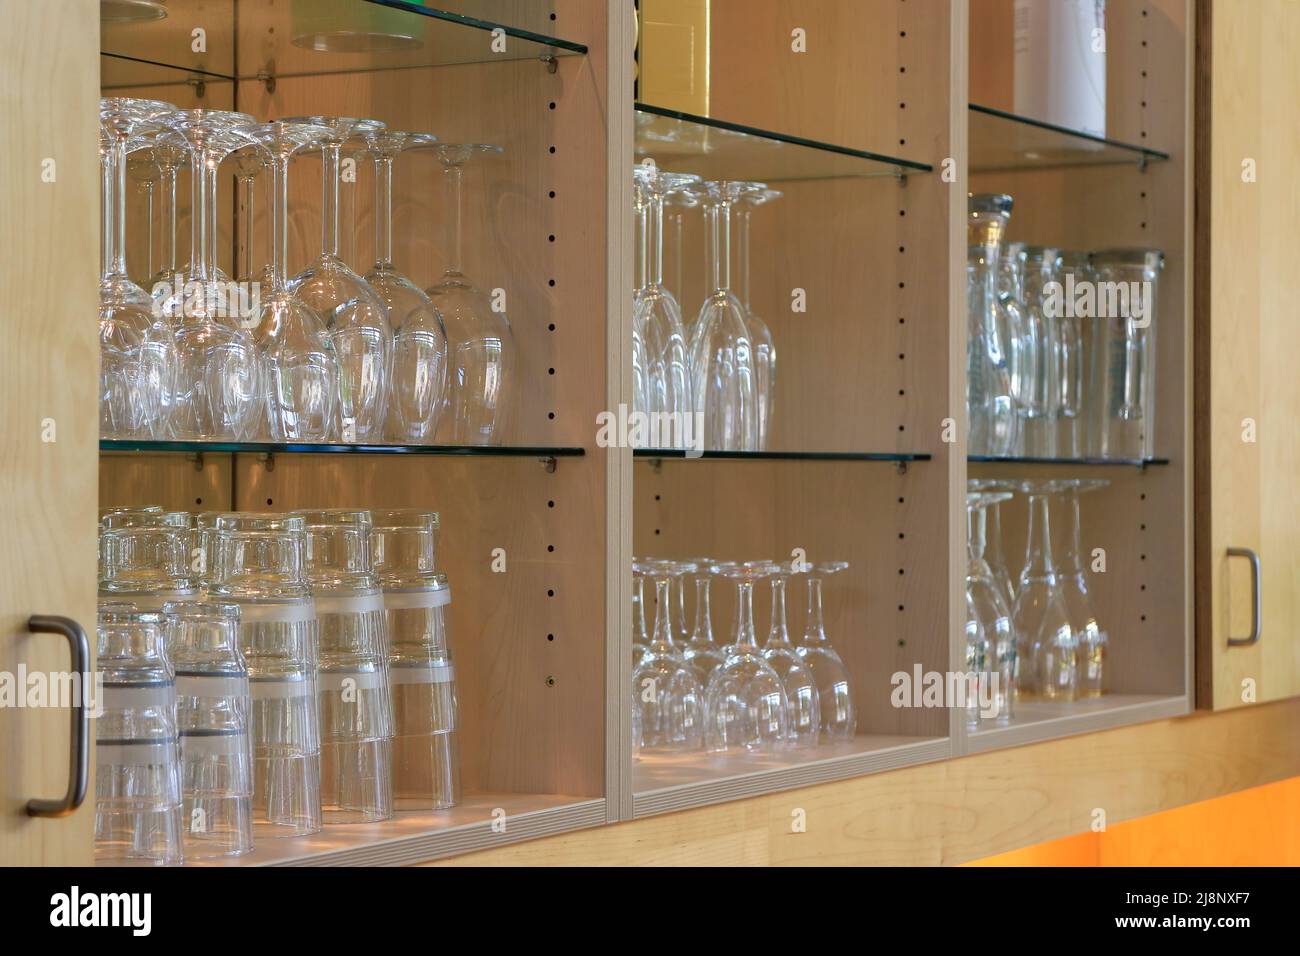 Many shiny glasses in rows on shelves inside a bar Stock Photo